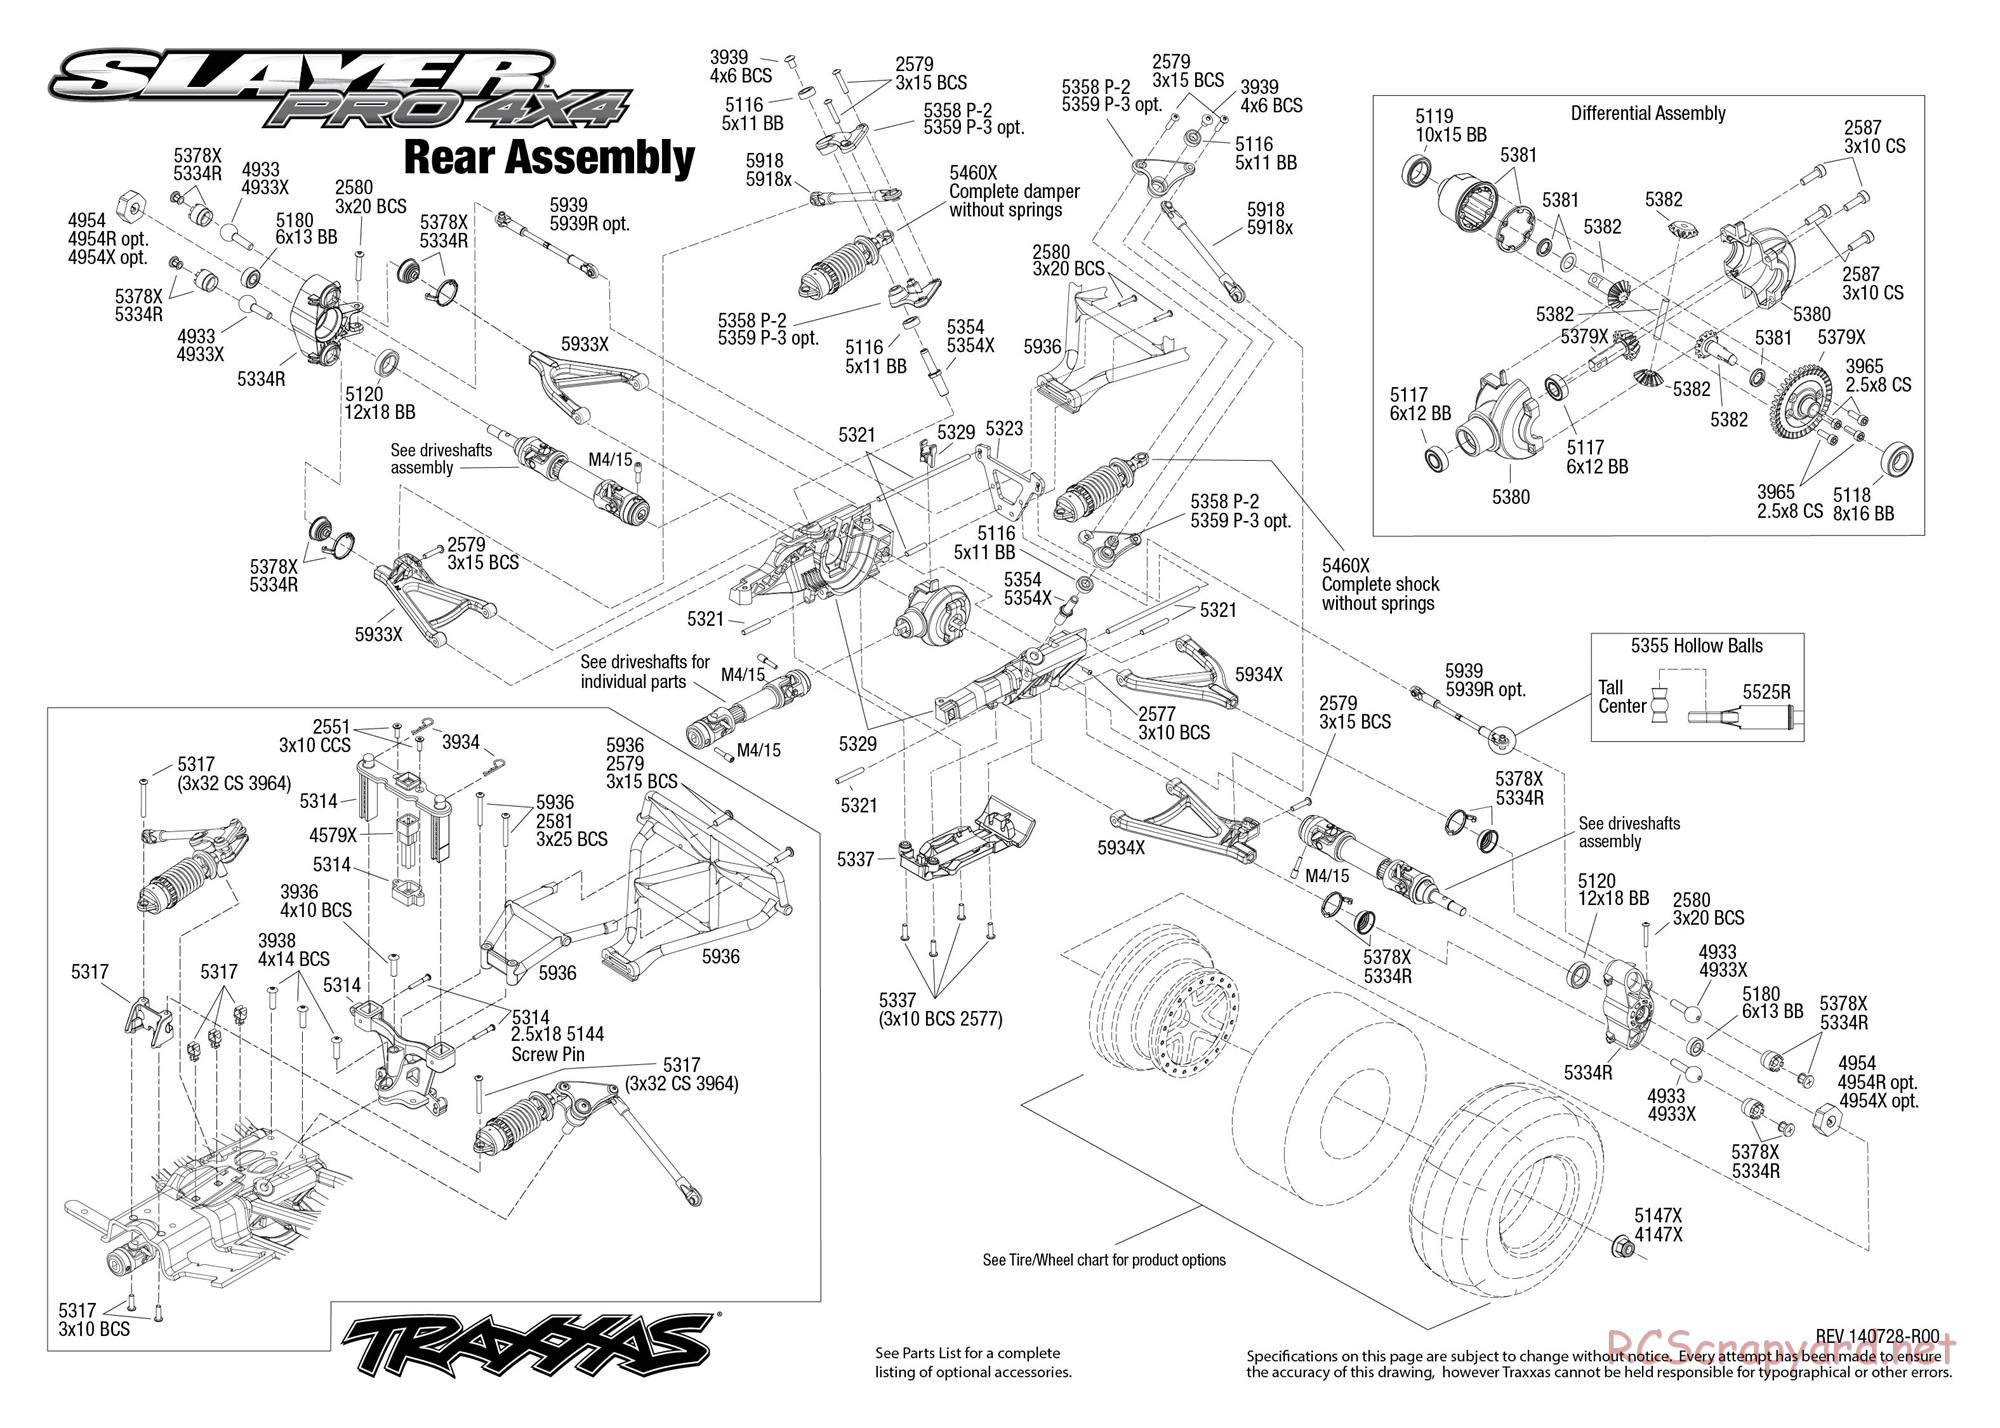 Traxxas - Slayer Pro 4x4 (2014) - Exploded Views - Page 5